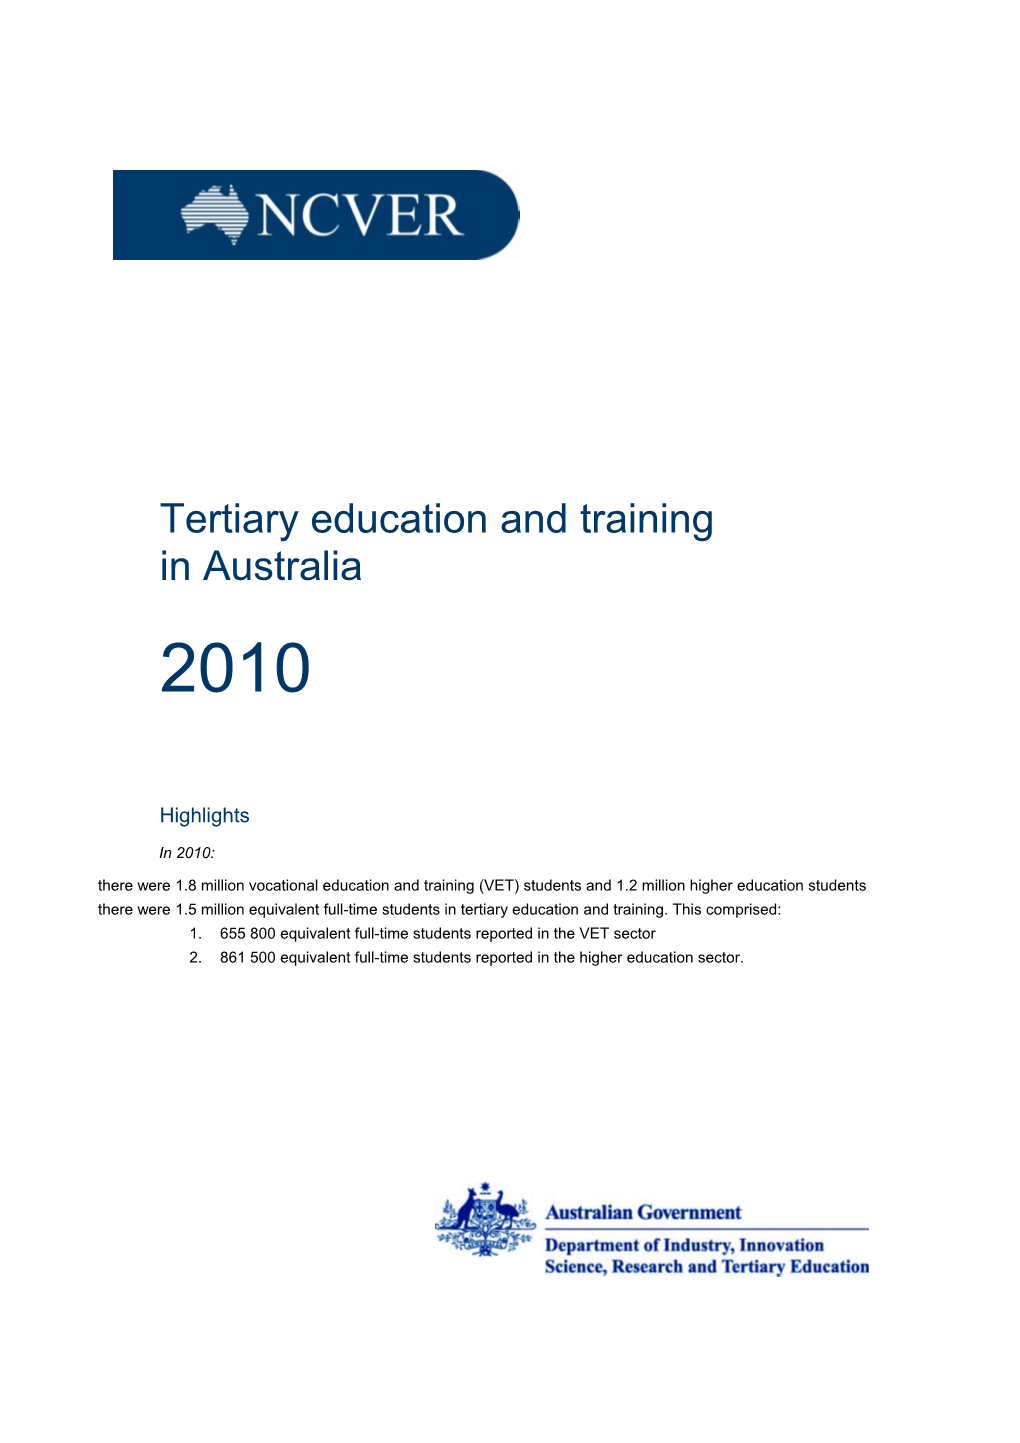 Tertiary Education and Training in Australia 2010